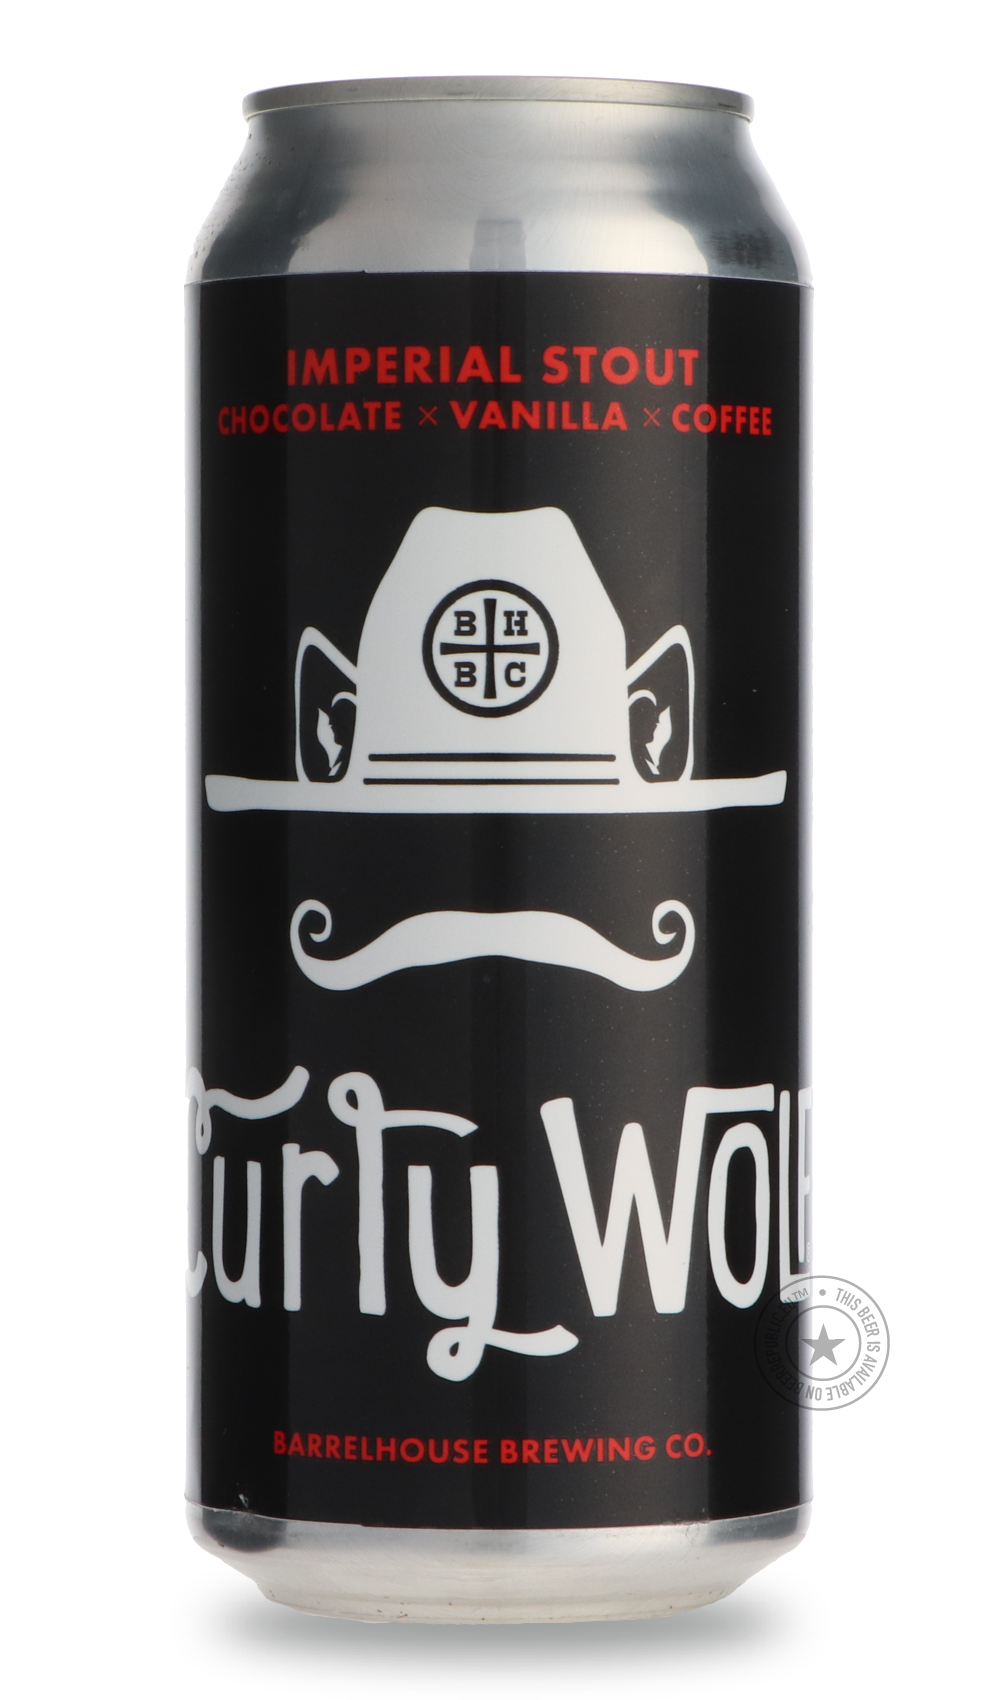 -BarrelHouse- Curly Wolf 2022-Stout & Porter- Only @ Beer Republic - The best online beer store for American & Canadian craft beer - Buy beer online from the USA and Canada - Bier online kopen - Amerikaans bier kopen - Craft beer store - Craft beer kopen - Amerikanisch bier kaufen - Bier online kaufen - Acheter biere online - IPA - Stout - Porter - New England IPA - Hazy IPA - Imperial Stout - Barrel Aged - Barrel Aged Imperial Stout - Brown - Dark beer - Blond - Blonde - Pilsner - Lager - Wheat - Weizen - 